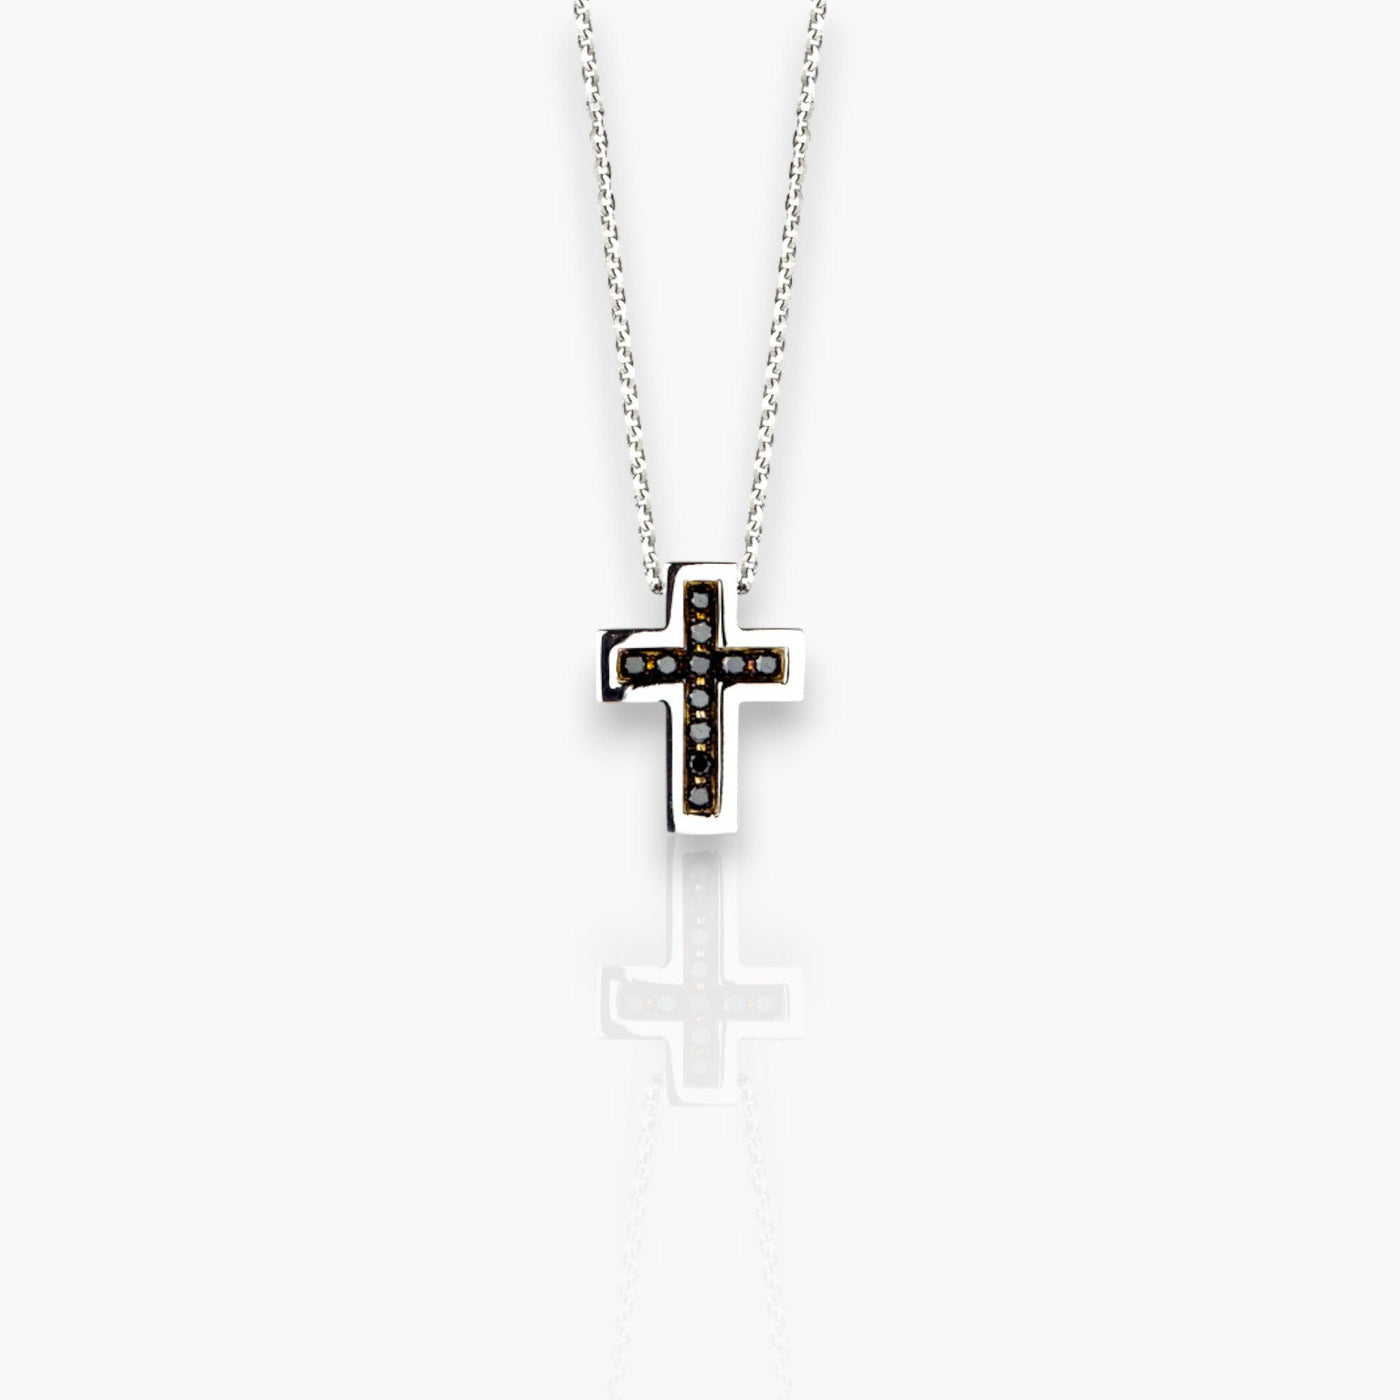 Necklace with Cross pendant (for Men) - Moregola Fine Jewelry